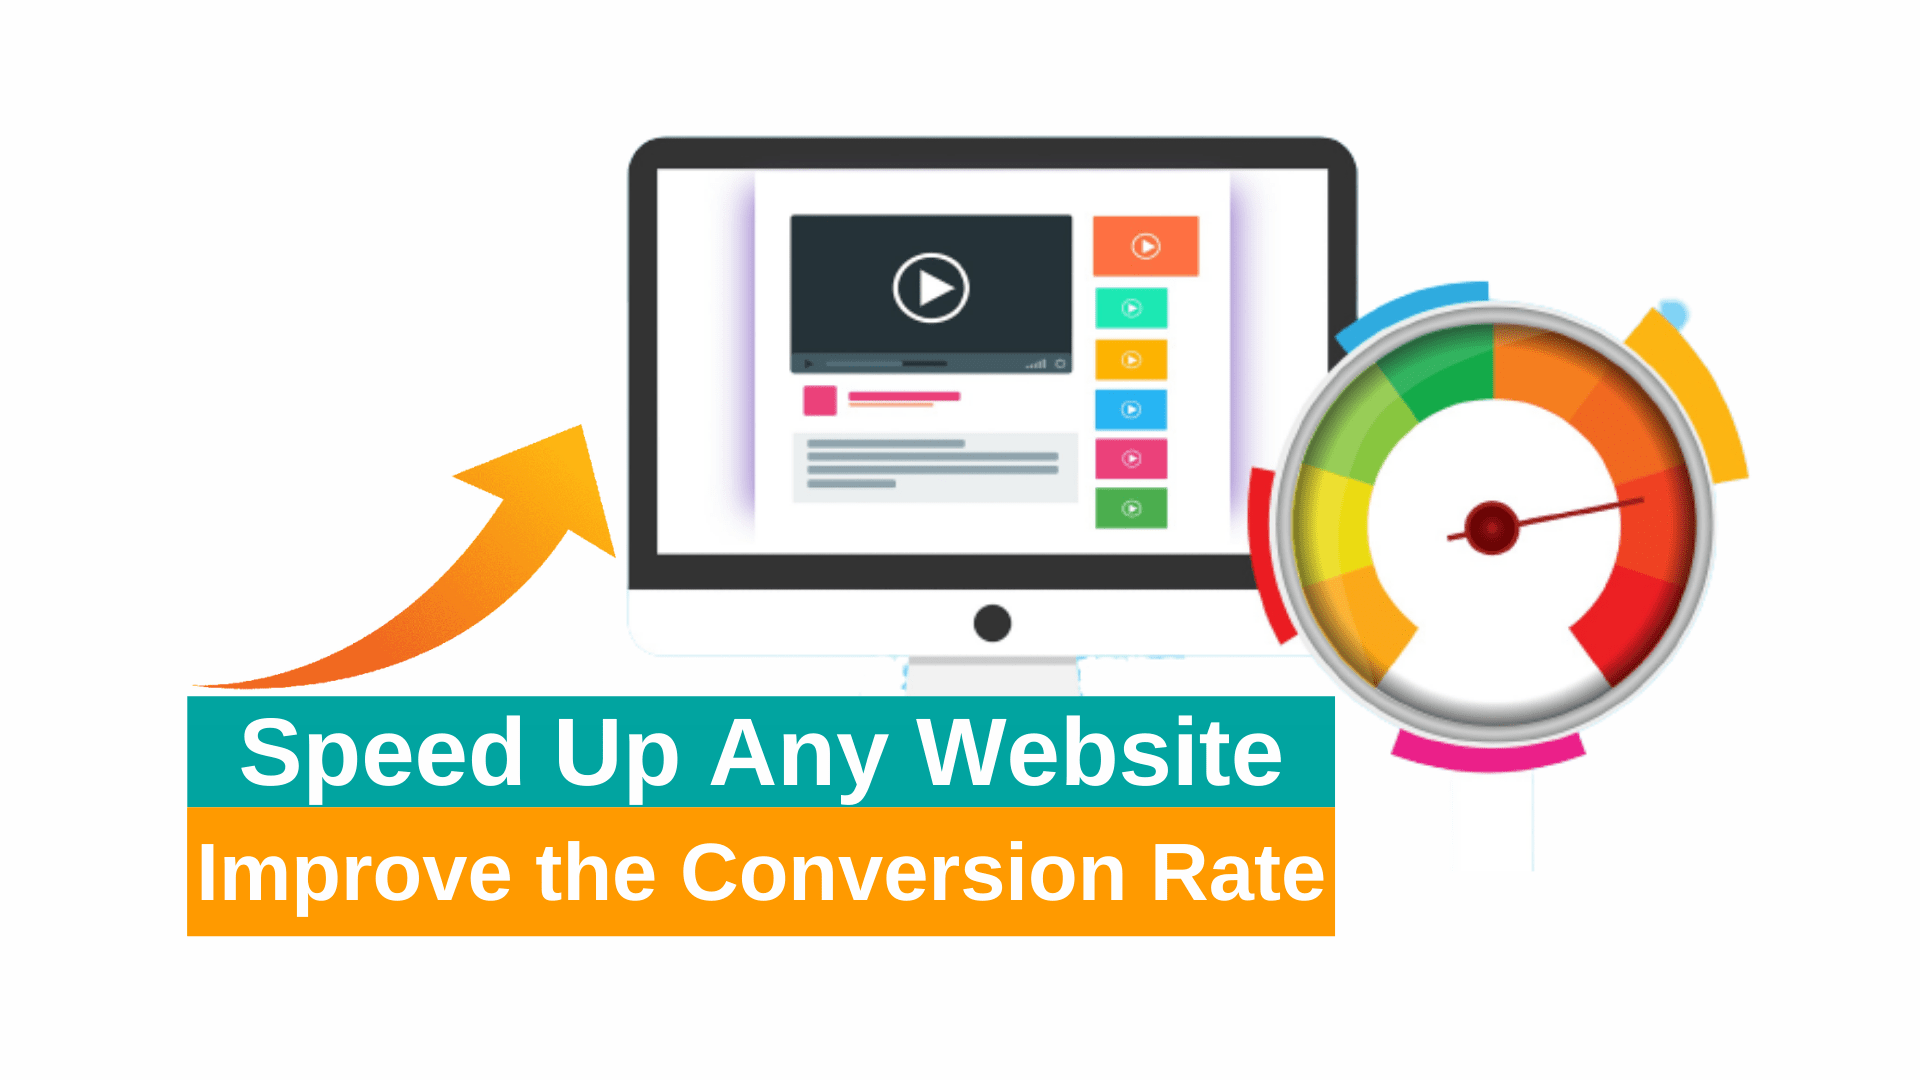 Speed Up any Website to Improve the Conversion